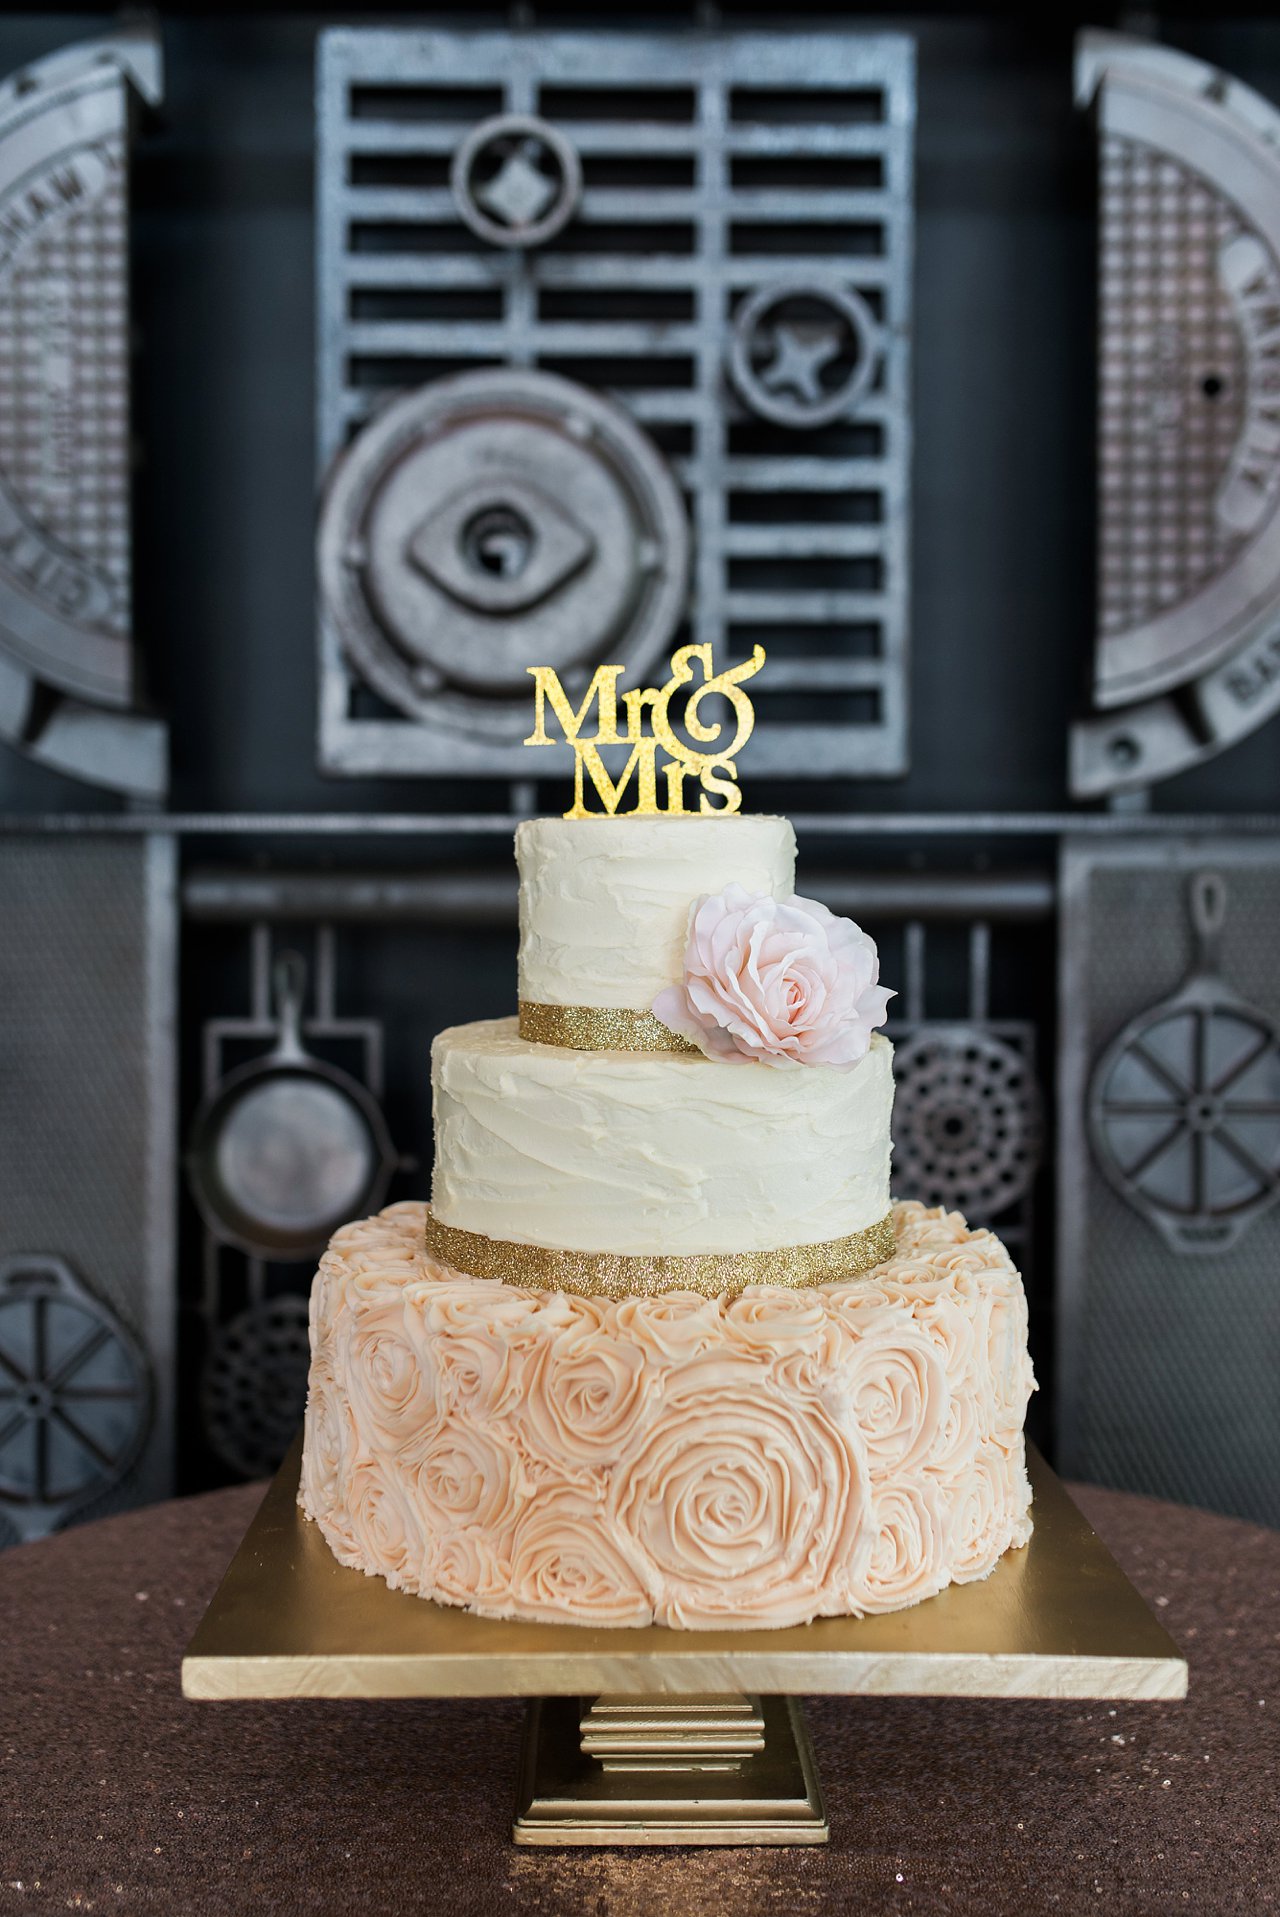 Rose gold and blush wedding cake against industrial back ground, featuring fresh flowers and iced rosettes by Olexa's Cakes in Birmingham, Alabama.